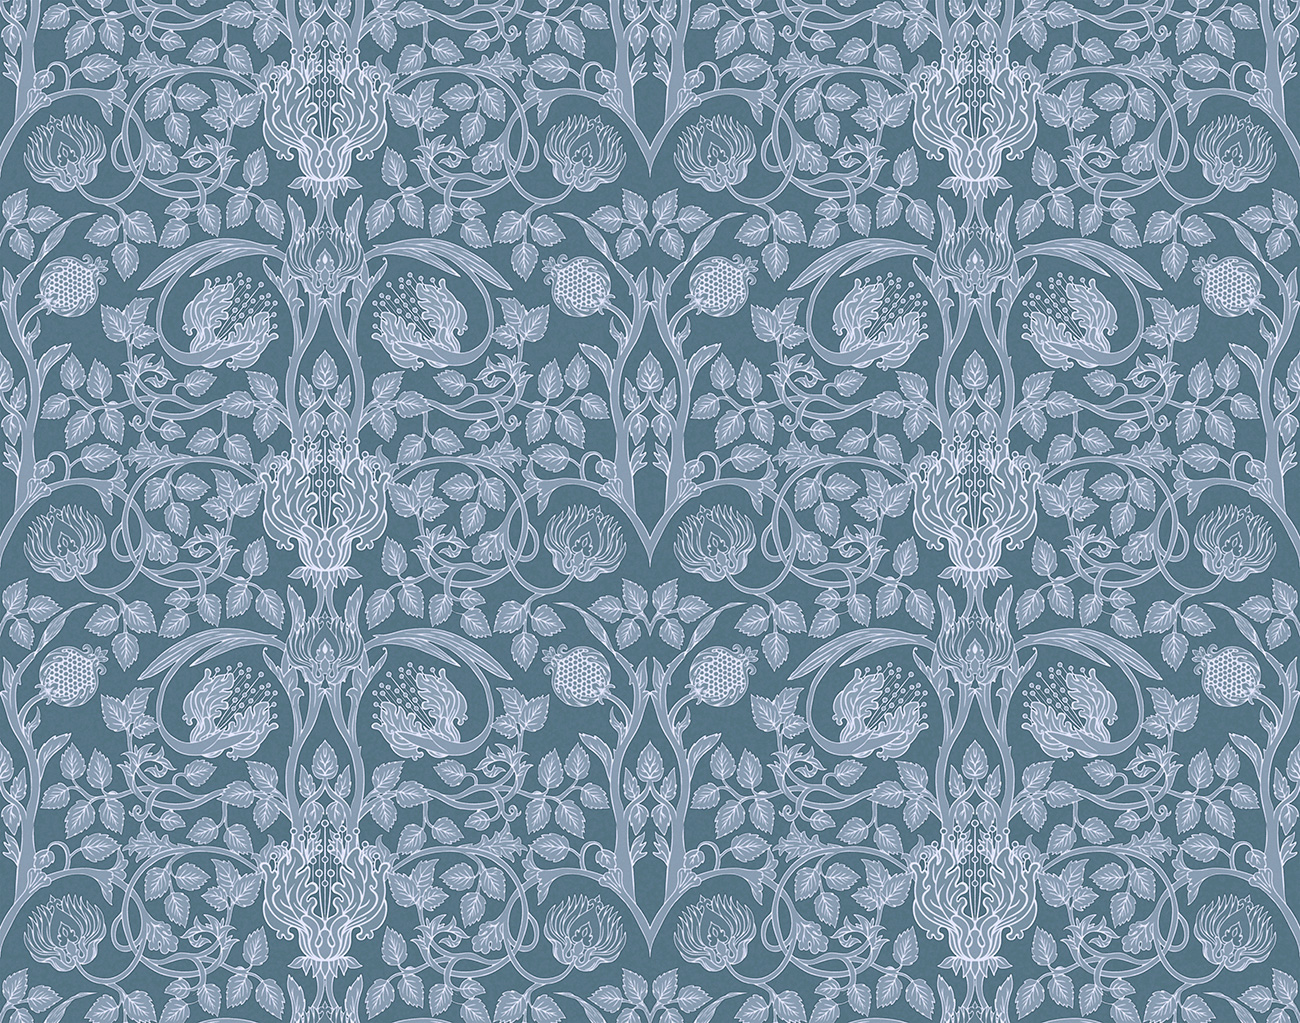 Decorative wallpaper with blue and white floral pattern